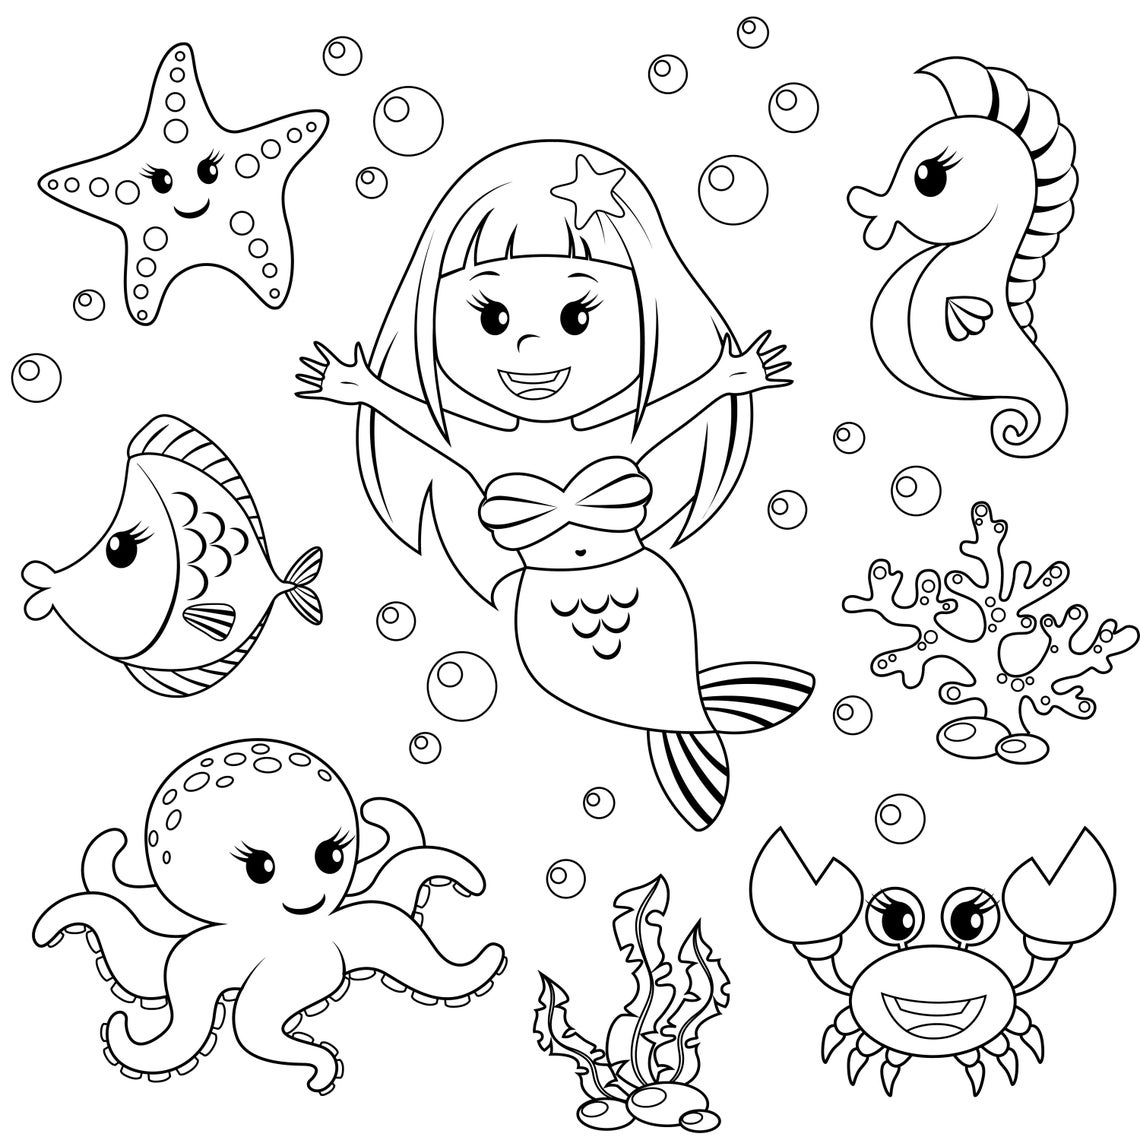 10 Printable Coloring Pages for Kids - Etsy